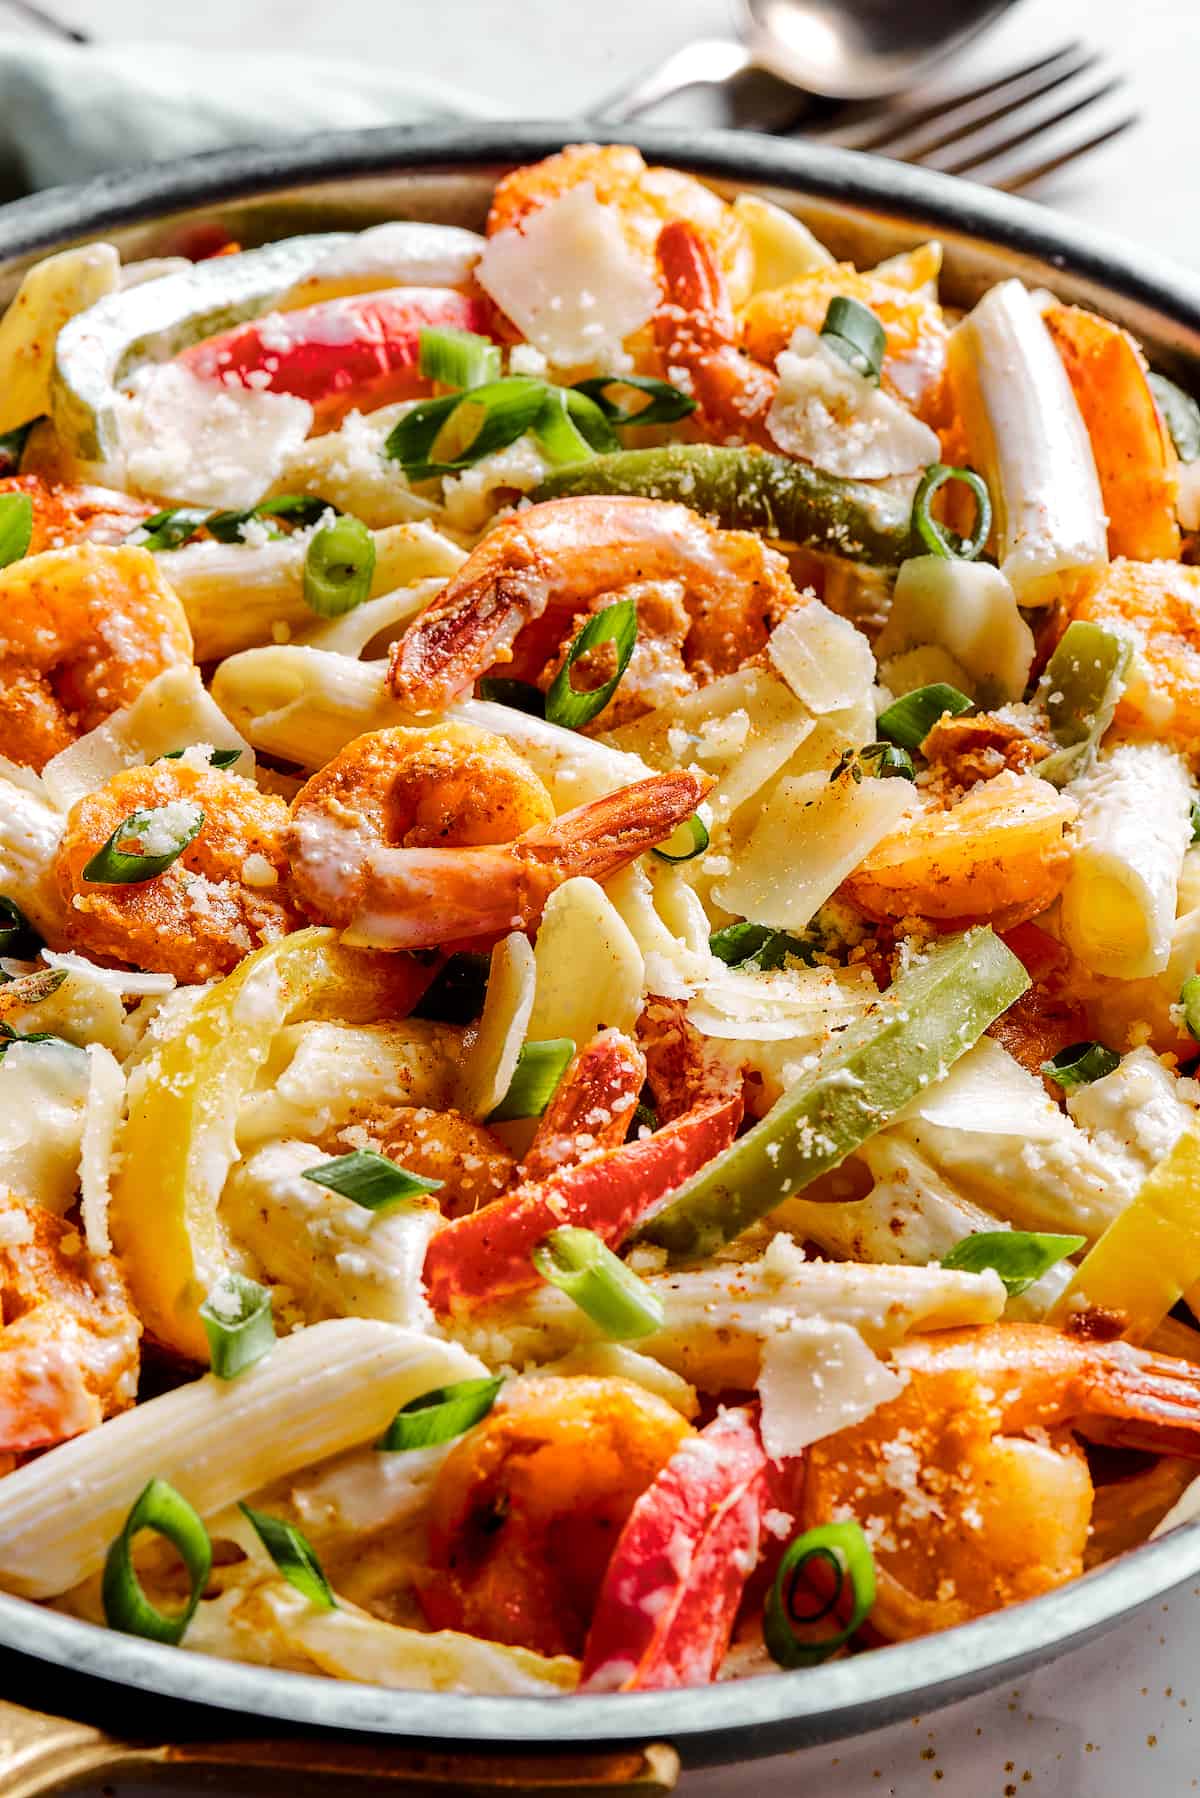 A skillet of bell peppers, pasta, and spicy shrimp in a creamy sauce.